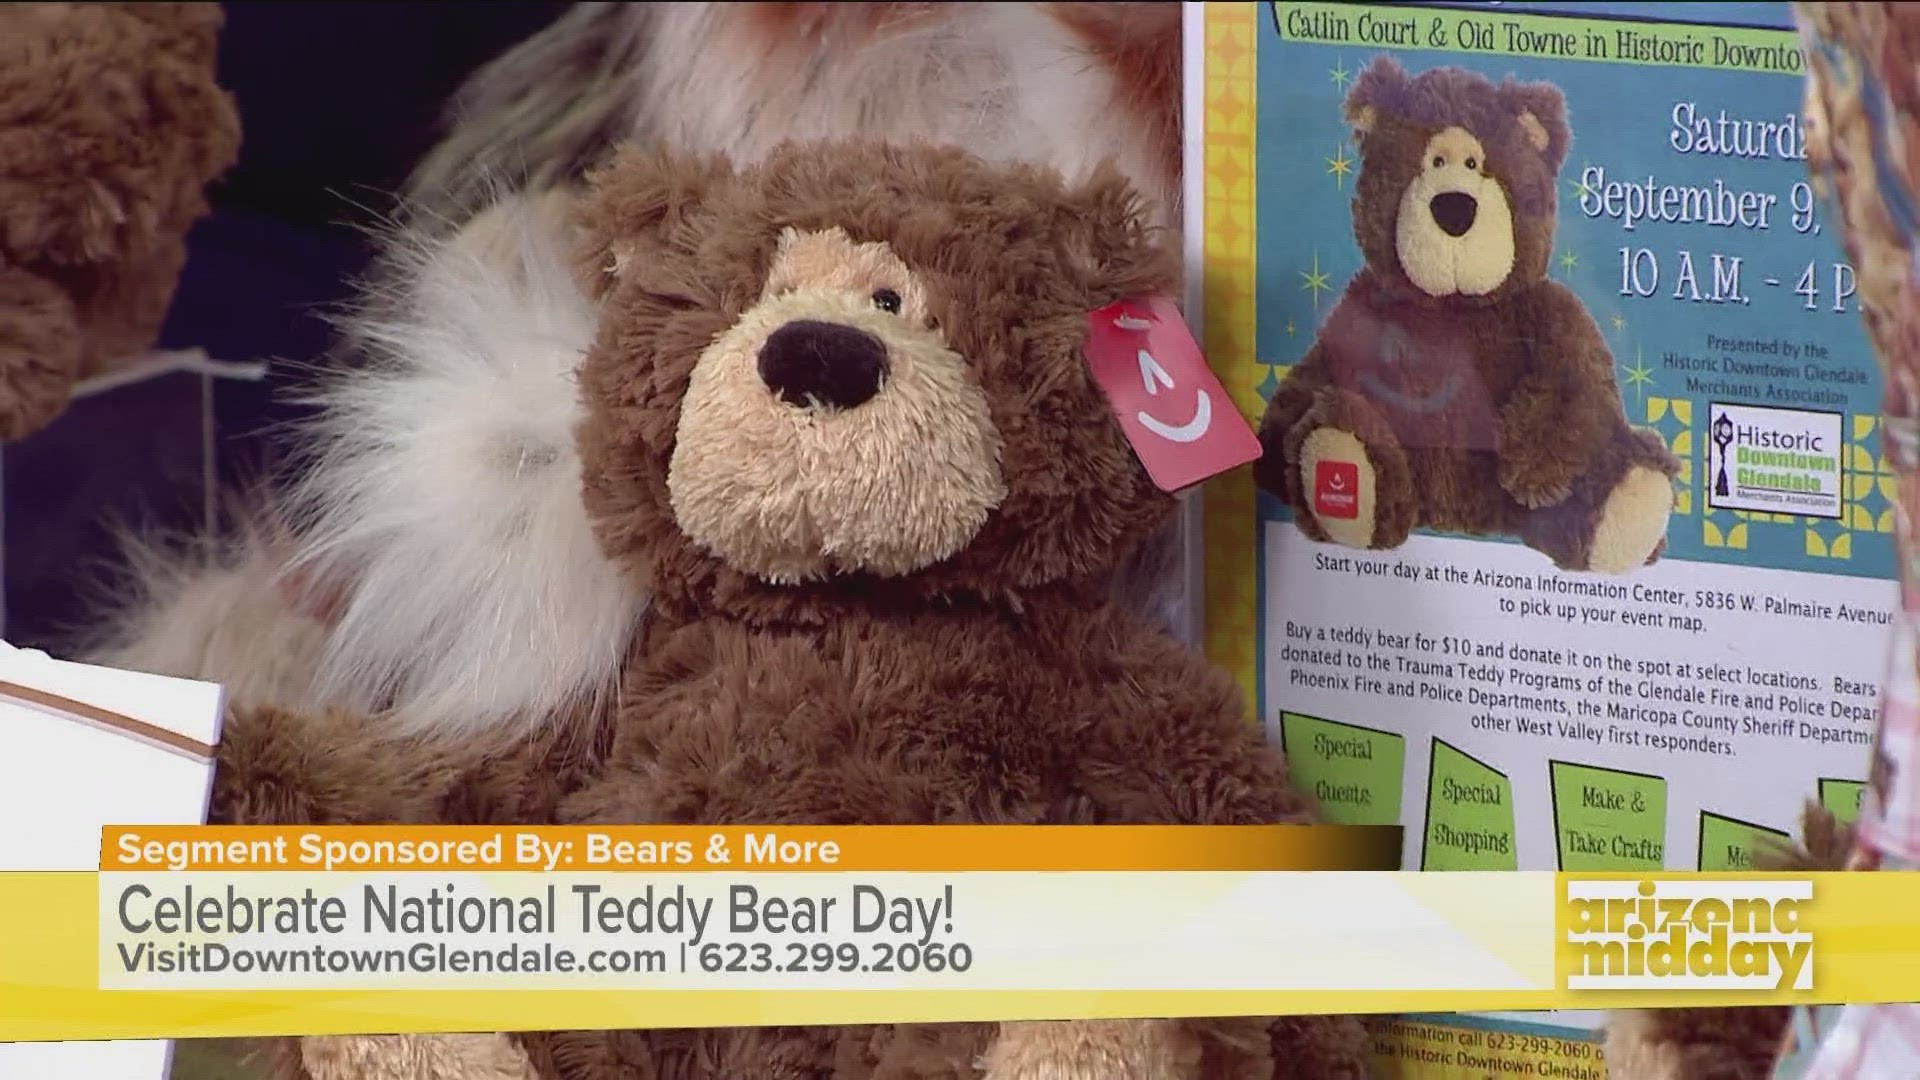 Valerie Burner with Bears & More shares how the whole family can celebrate Teddy Bears and give back to the community in Historic Downtown Glendale Saturday (9-9).